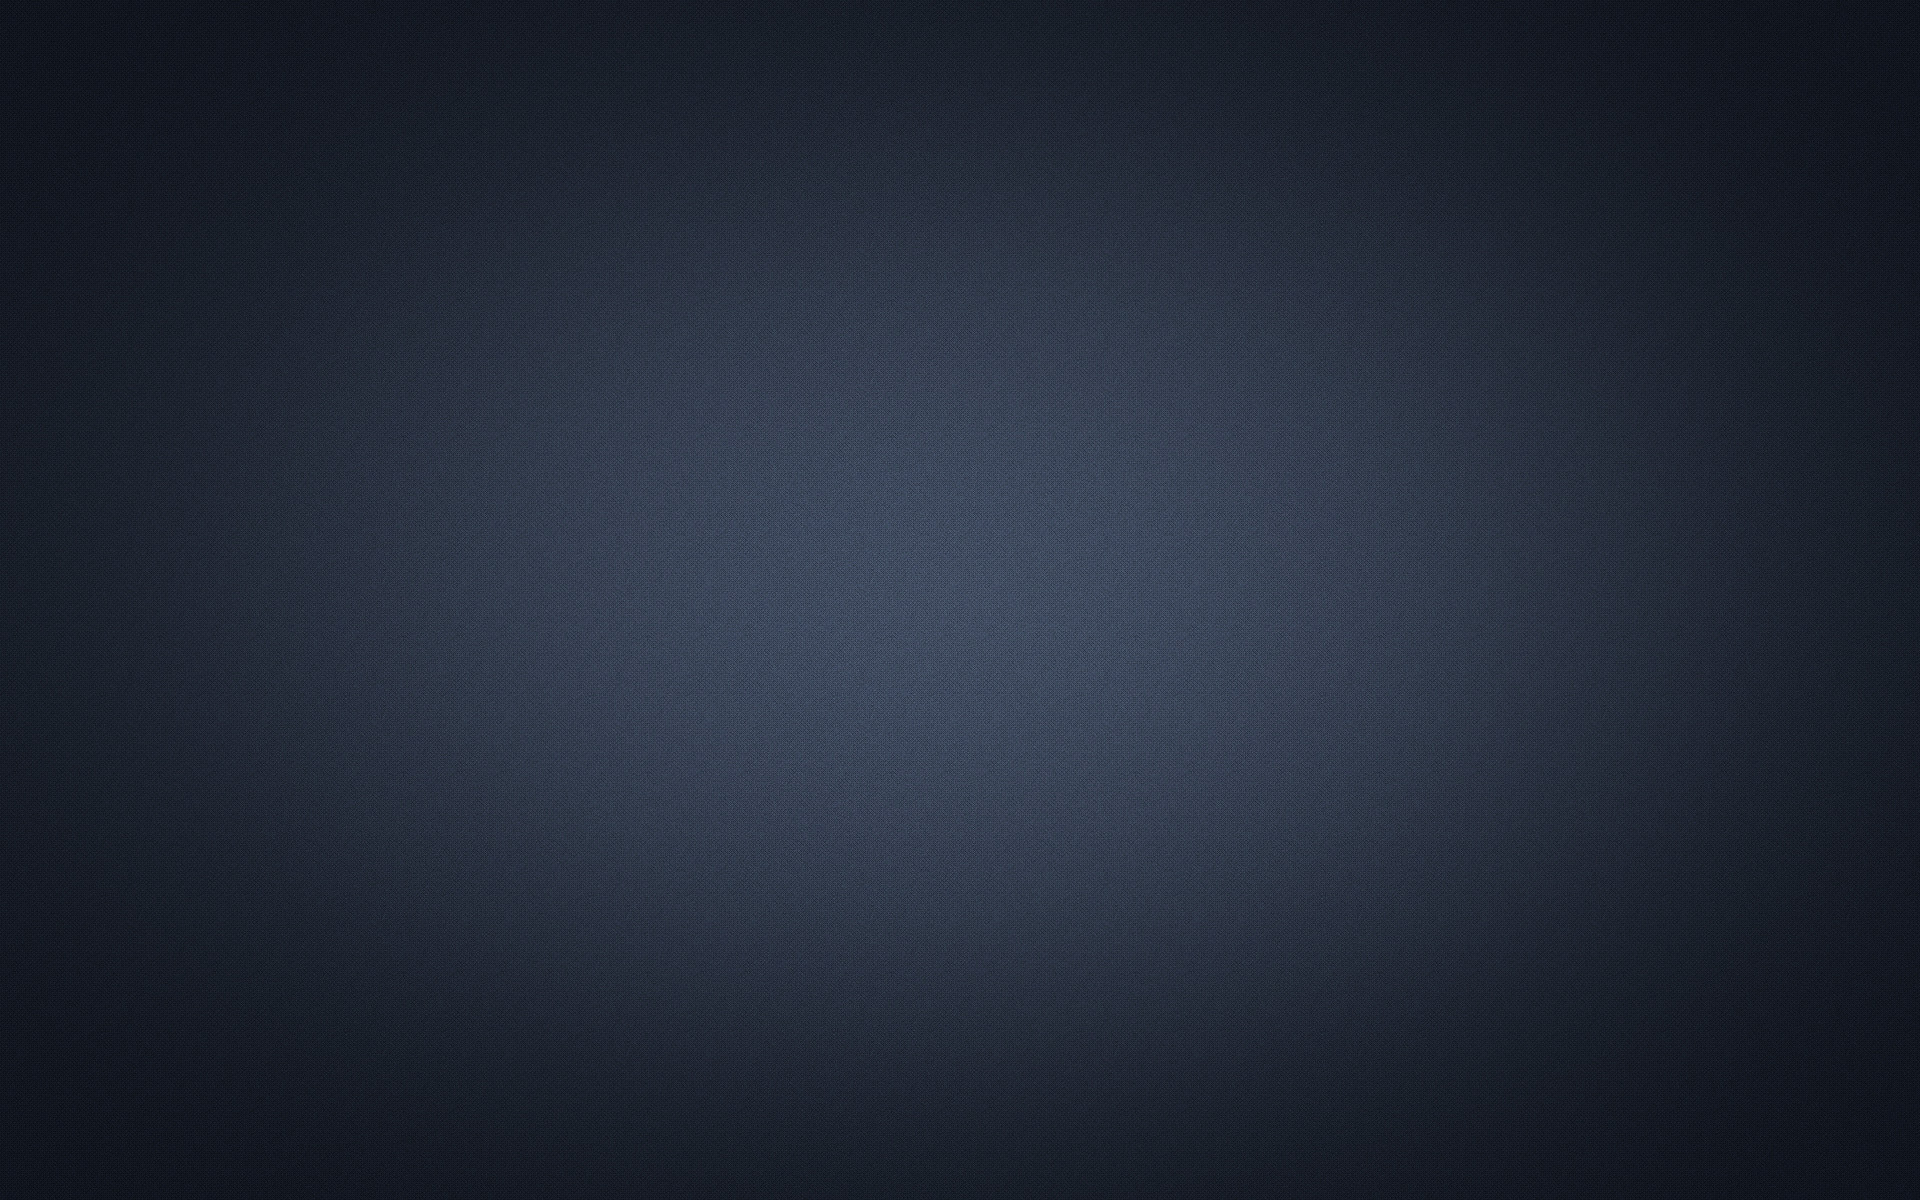 1920x1200 Blue And Black Iphone Wallpaper 6 Wide Wallpaper .